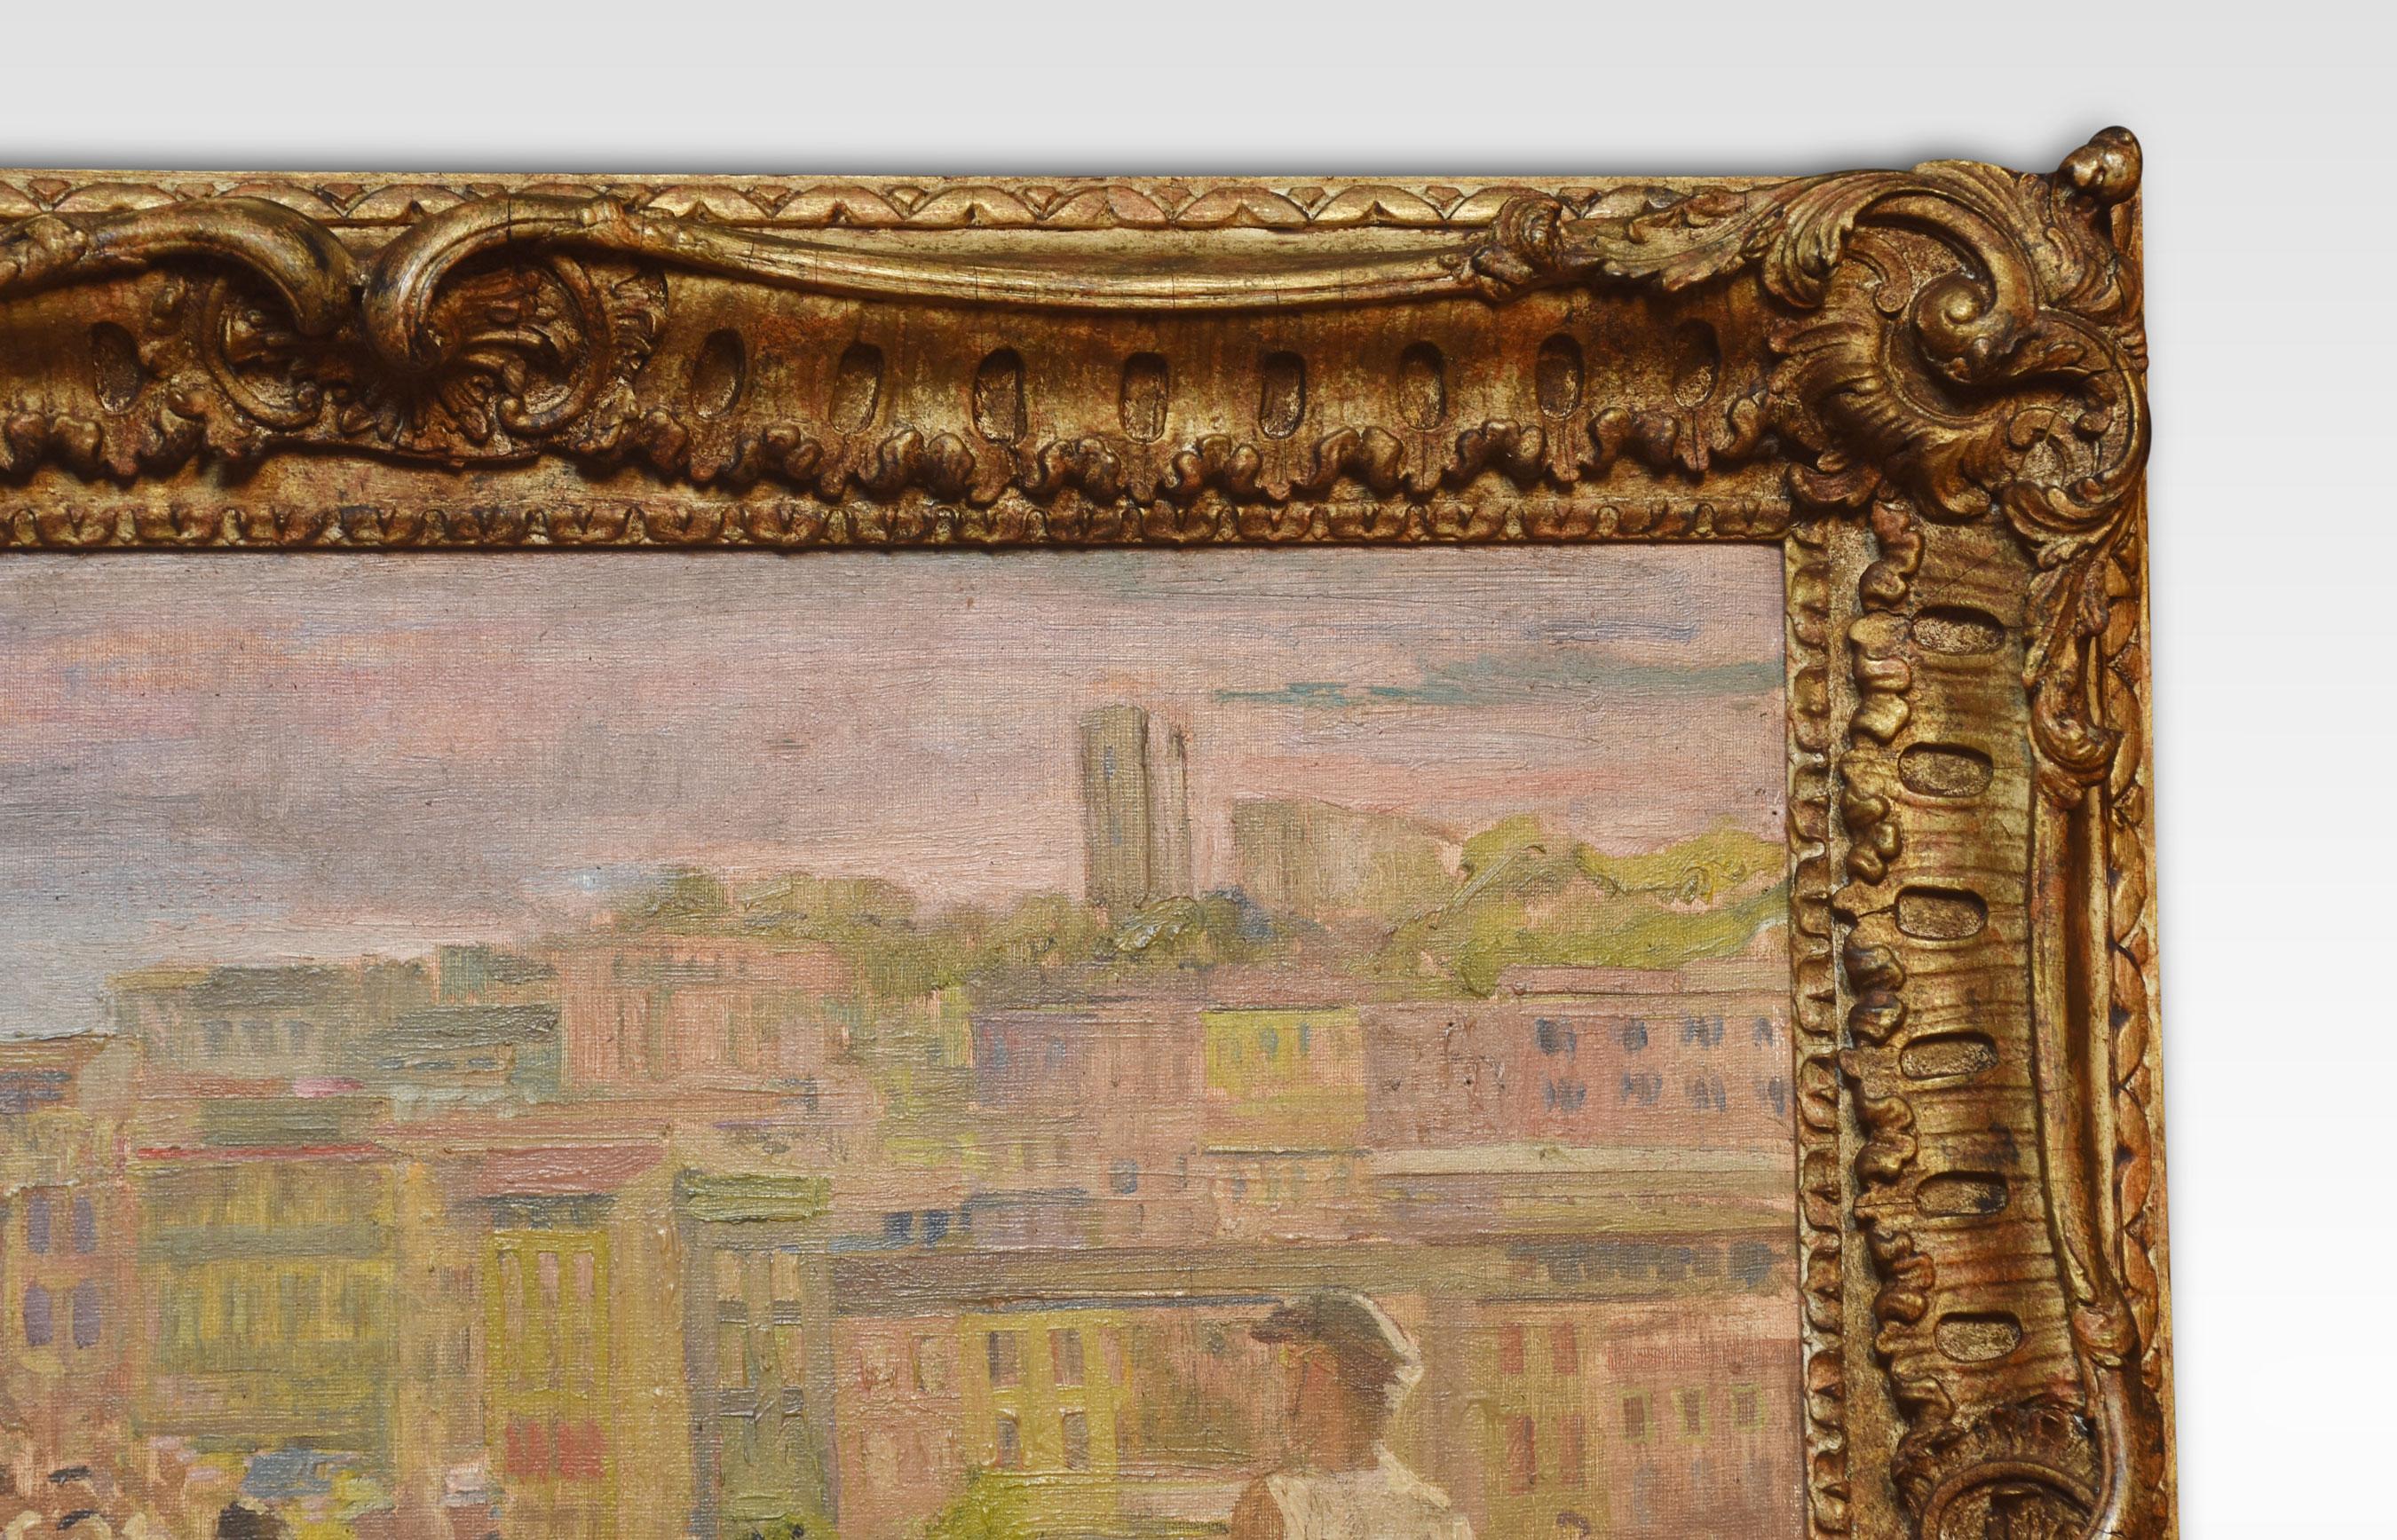 Oil on panel of figures in an Italian city, cased in giltwood frame, singned to bottom left.
Dimensions
Height 26.5 Inches
Width 30 Inches
Depth 3 Inches.